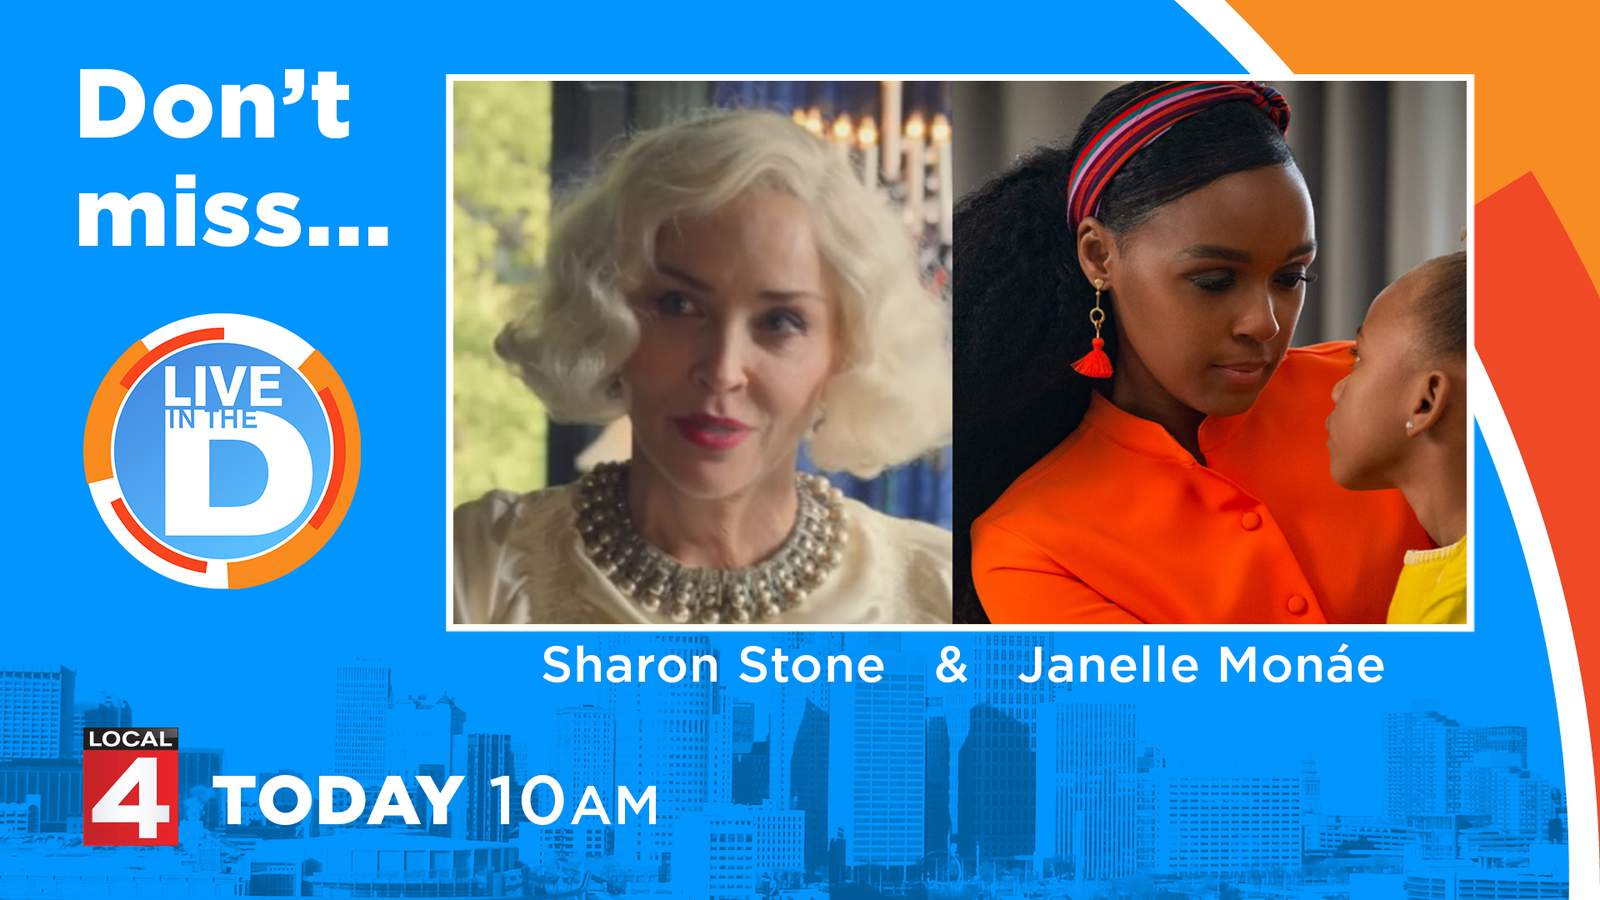 Janelle Monáe and Sharon Stone on ‘Live in the D’ today at 10AM!